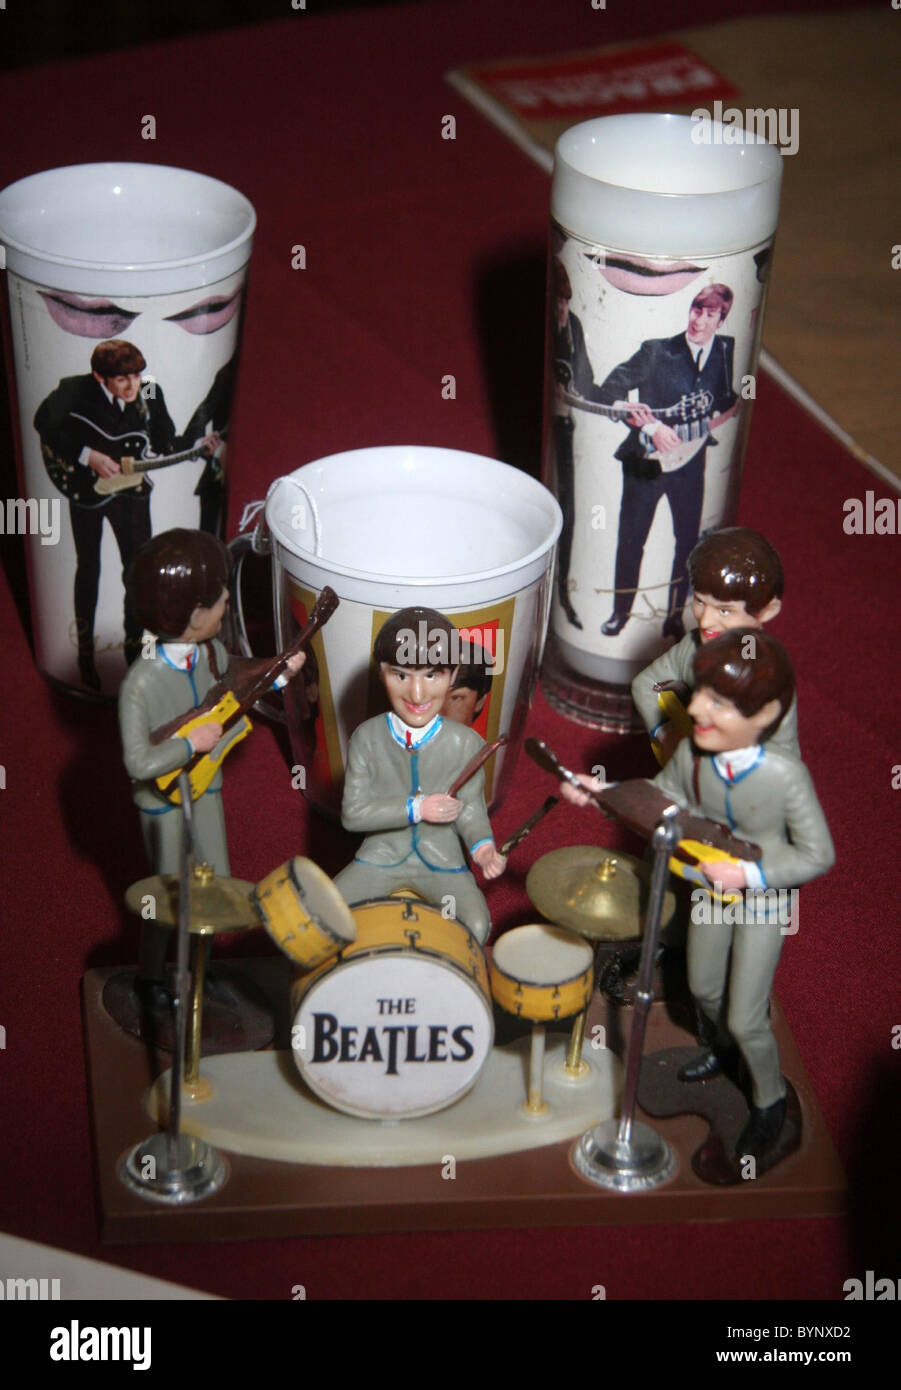 Beatles merchandising stage set and plastic beakers The Rock 'N' Roll  Celebrity Memorabilia Fame Bureau Auction held at the Stock Photo - Alamy